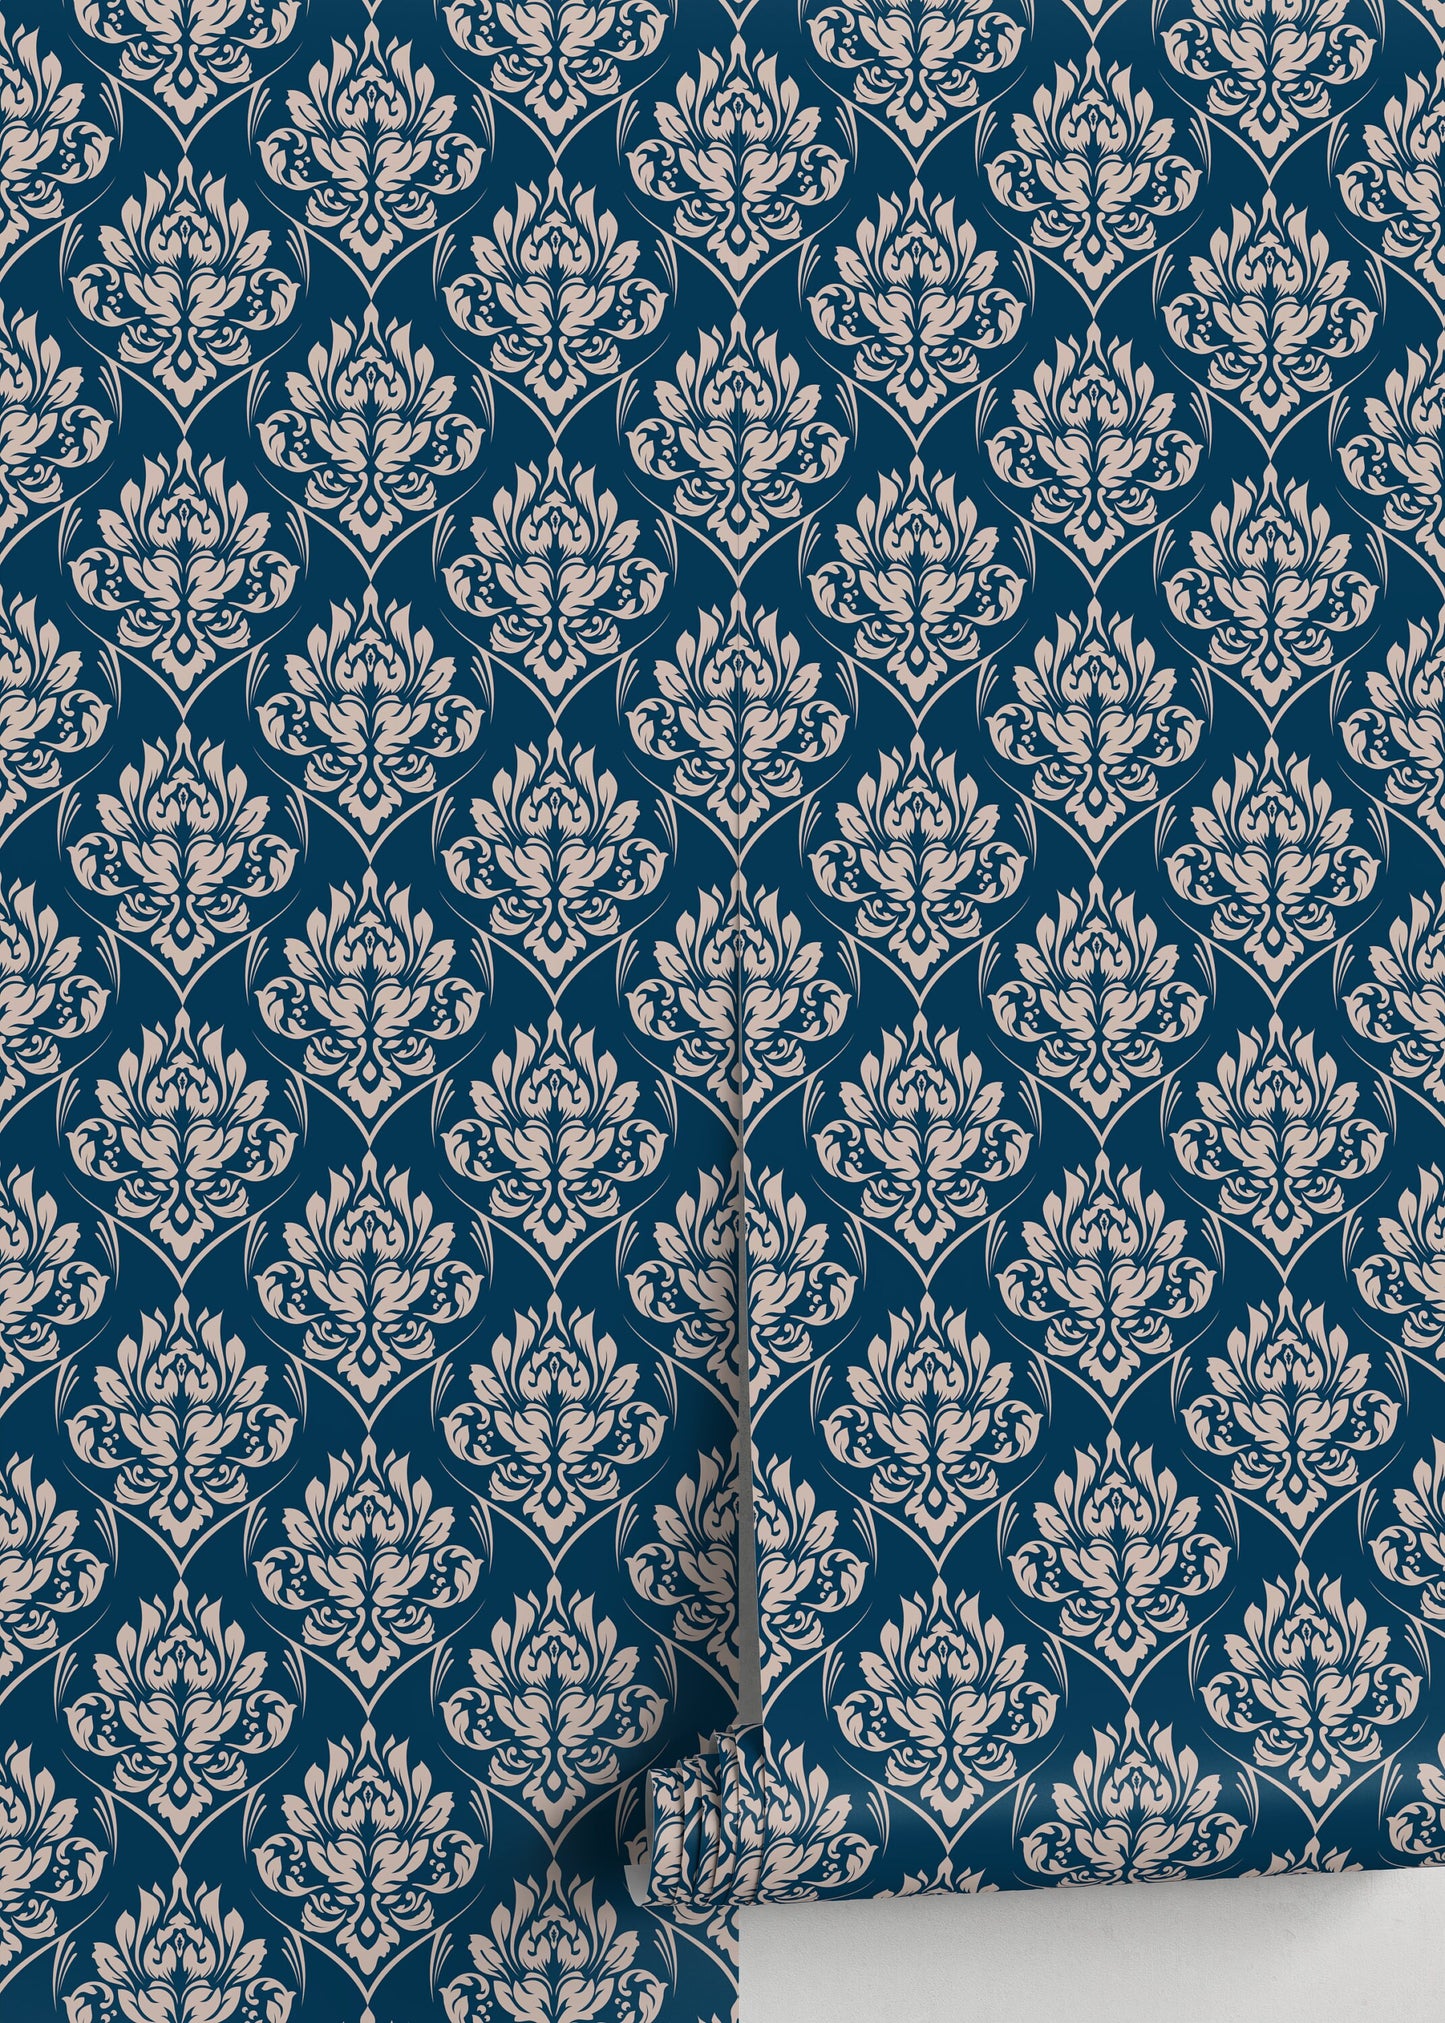 Blue and Beige Damask Wallpaper / Peel and Stick Wallpaper Removable Wallpaper Home Decor Wall Art Wall Decor Room Decor - D227